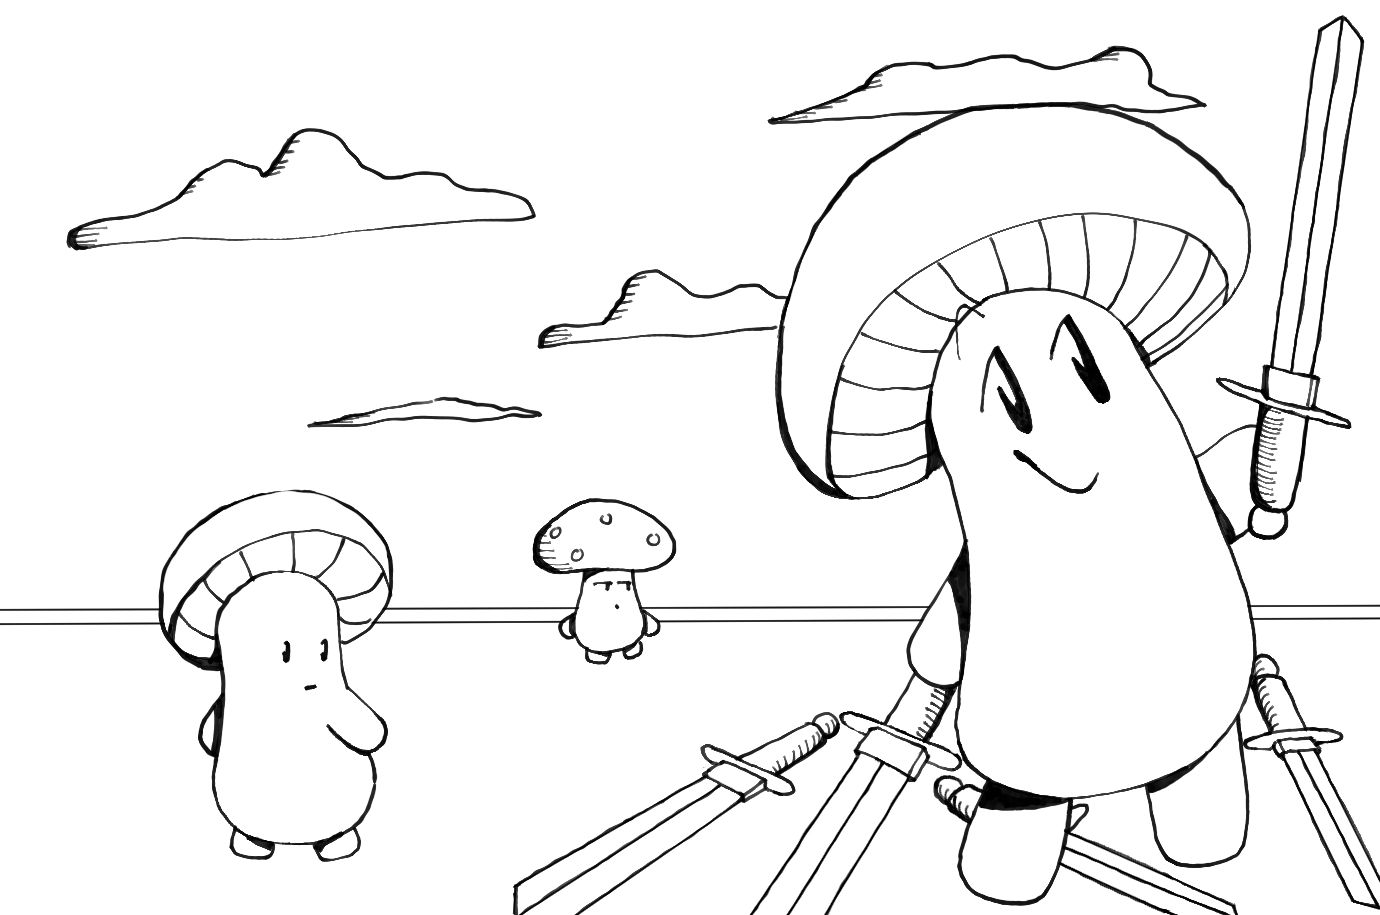 An image of three mushroom people, one inspecting 5 swords and the others looking back at them.